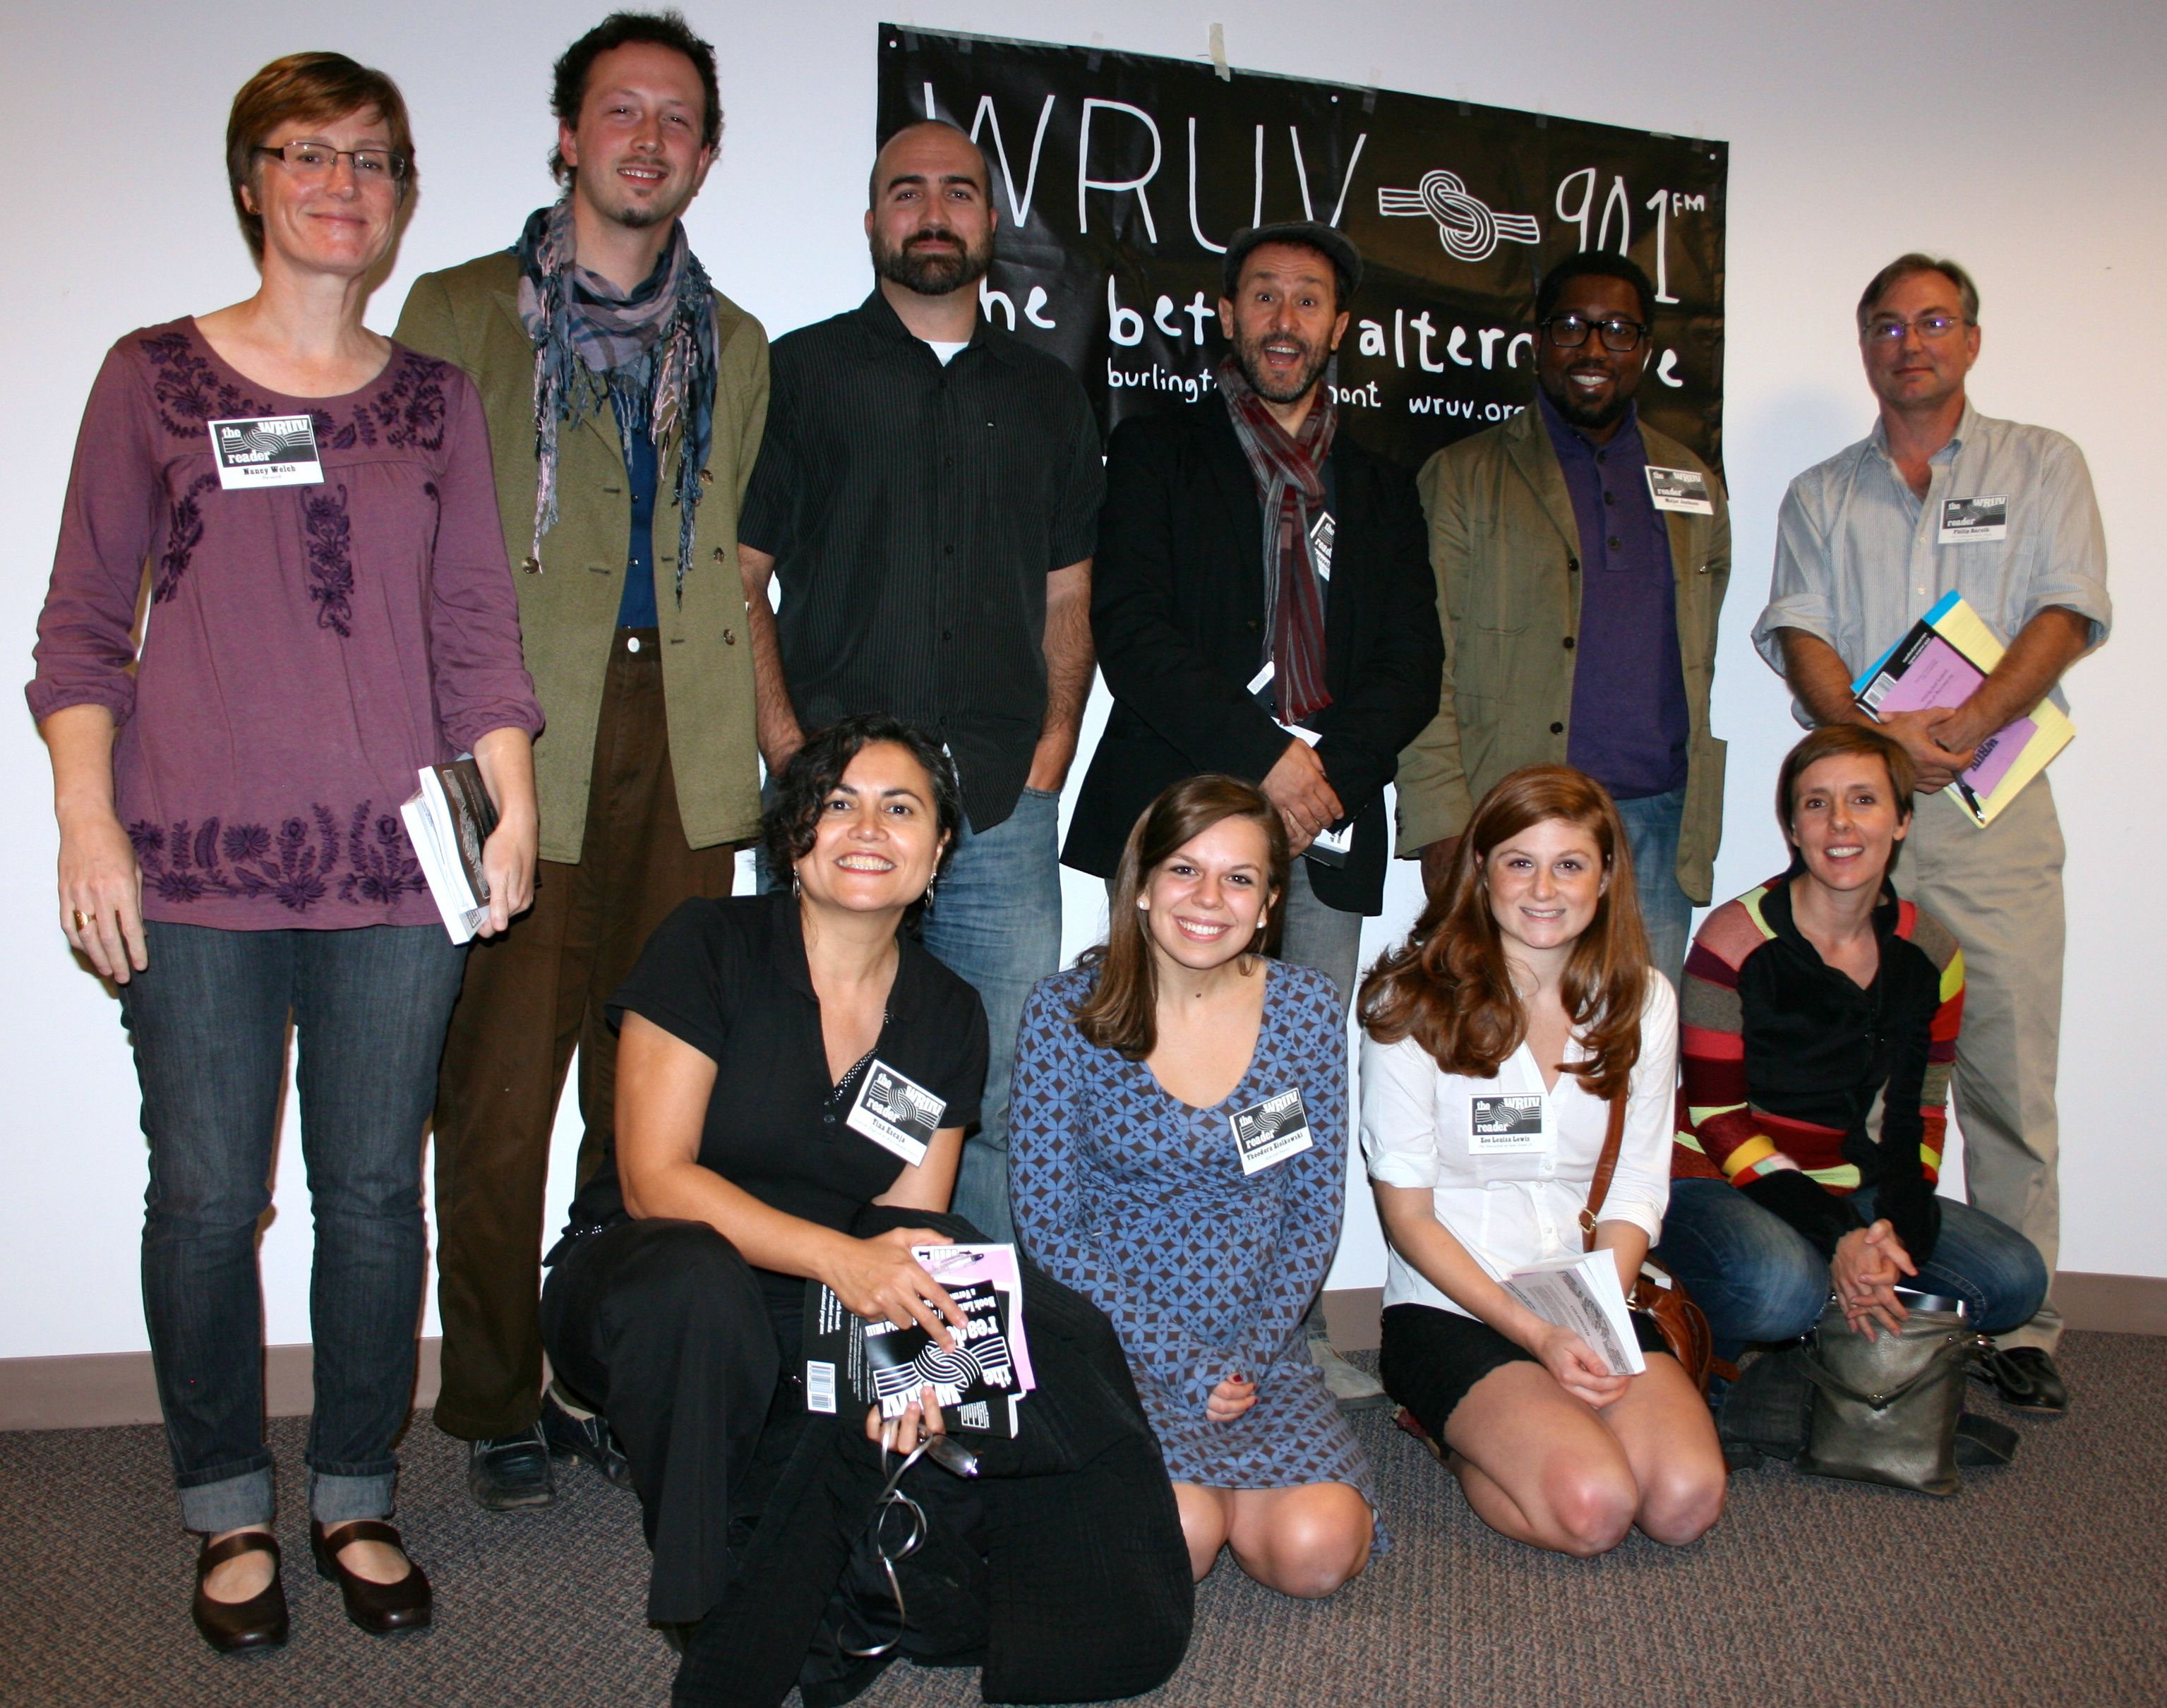 We launched The WRUV Reader in Fall 2012. Readers included (clockwise from left) Nancy Welch, Ben Aleshire, Aaron Smith, Antonello Borra, Major Jackson, Phillip Baruth, Abby Paige, Zoe Lewis, Theodora Ziolkowski and Tina Escaja. 